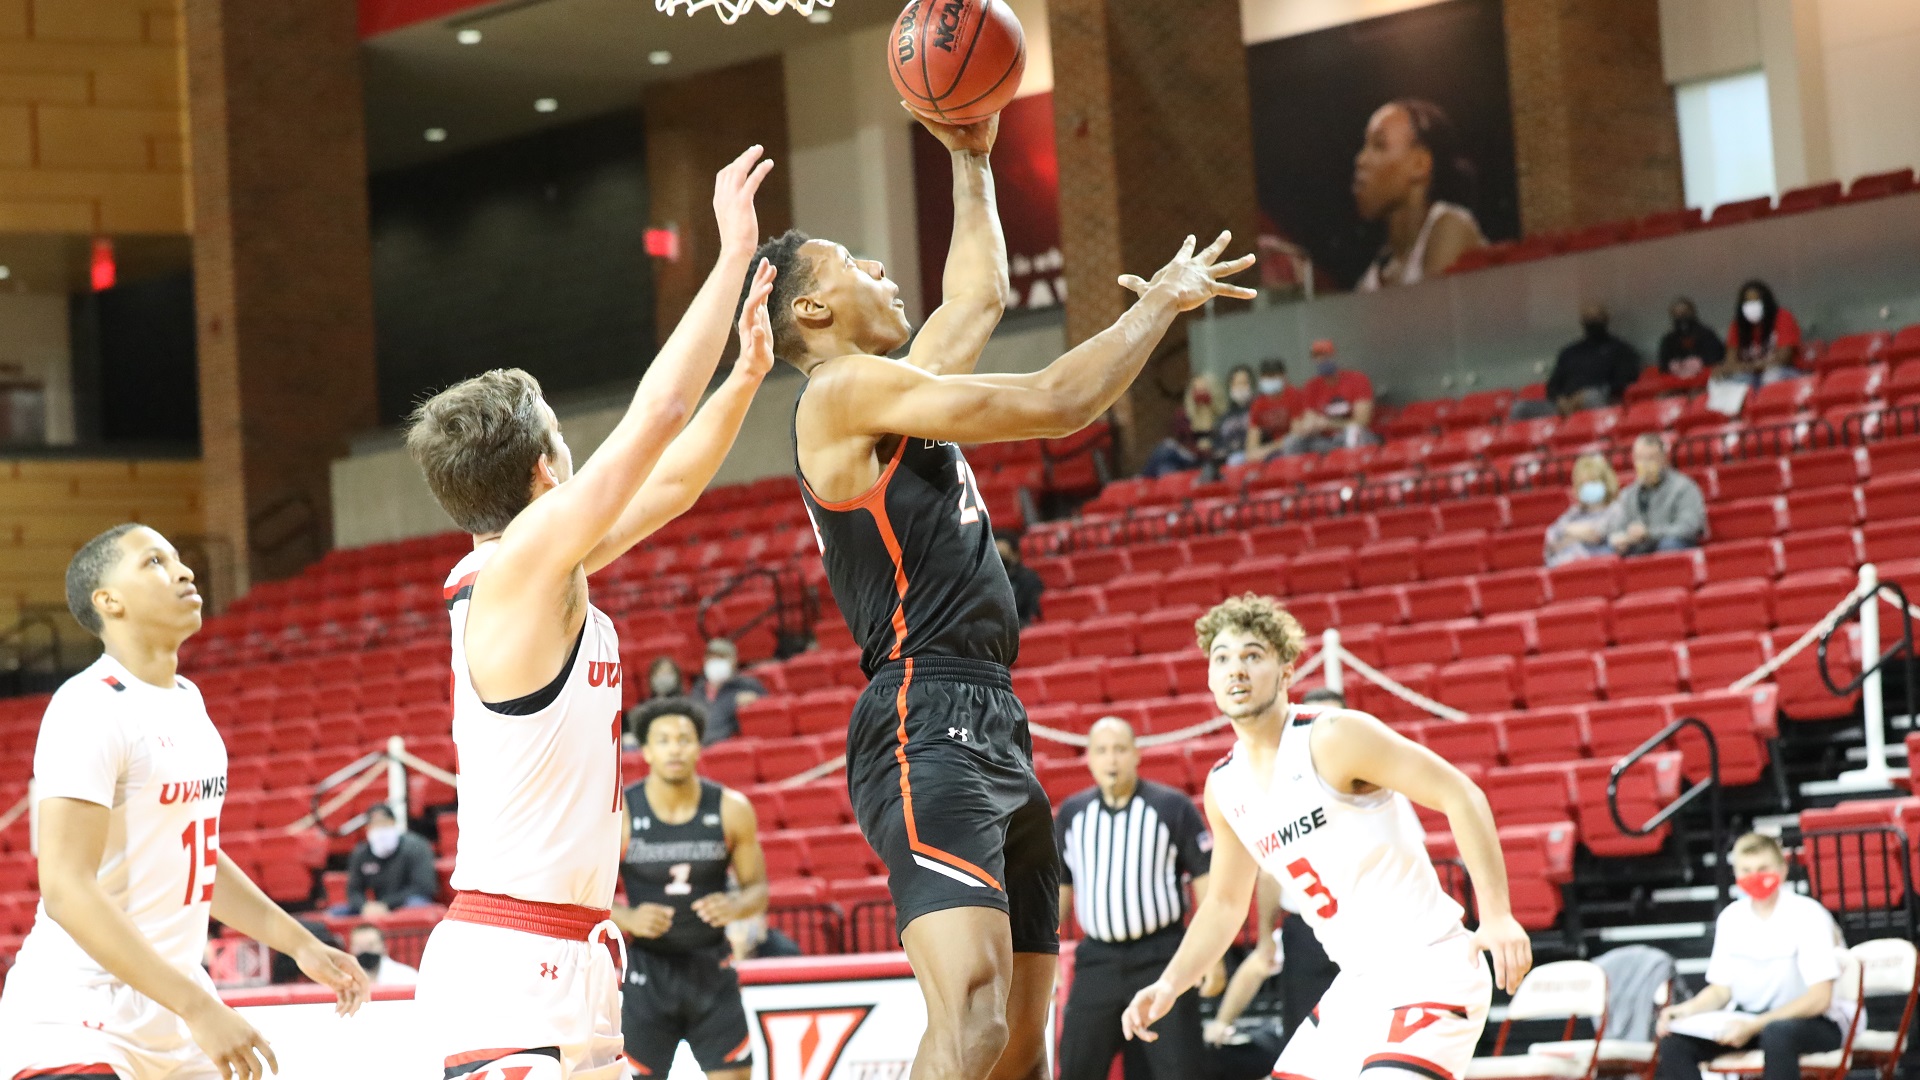 Second-half surge boosts Pioneers to 101-82 win at UVA Wise